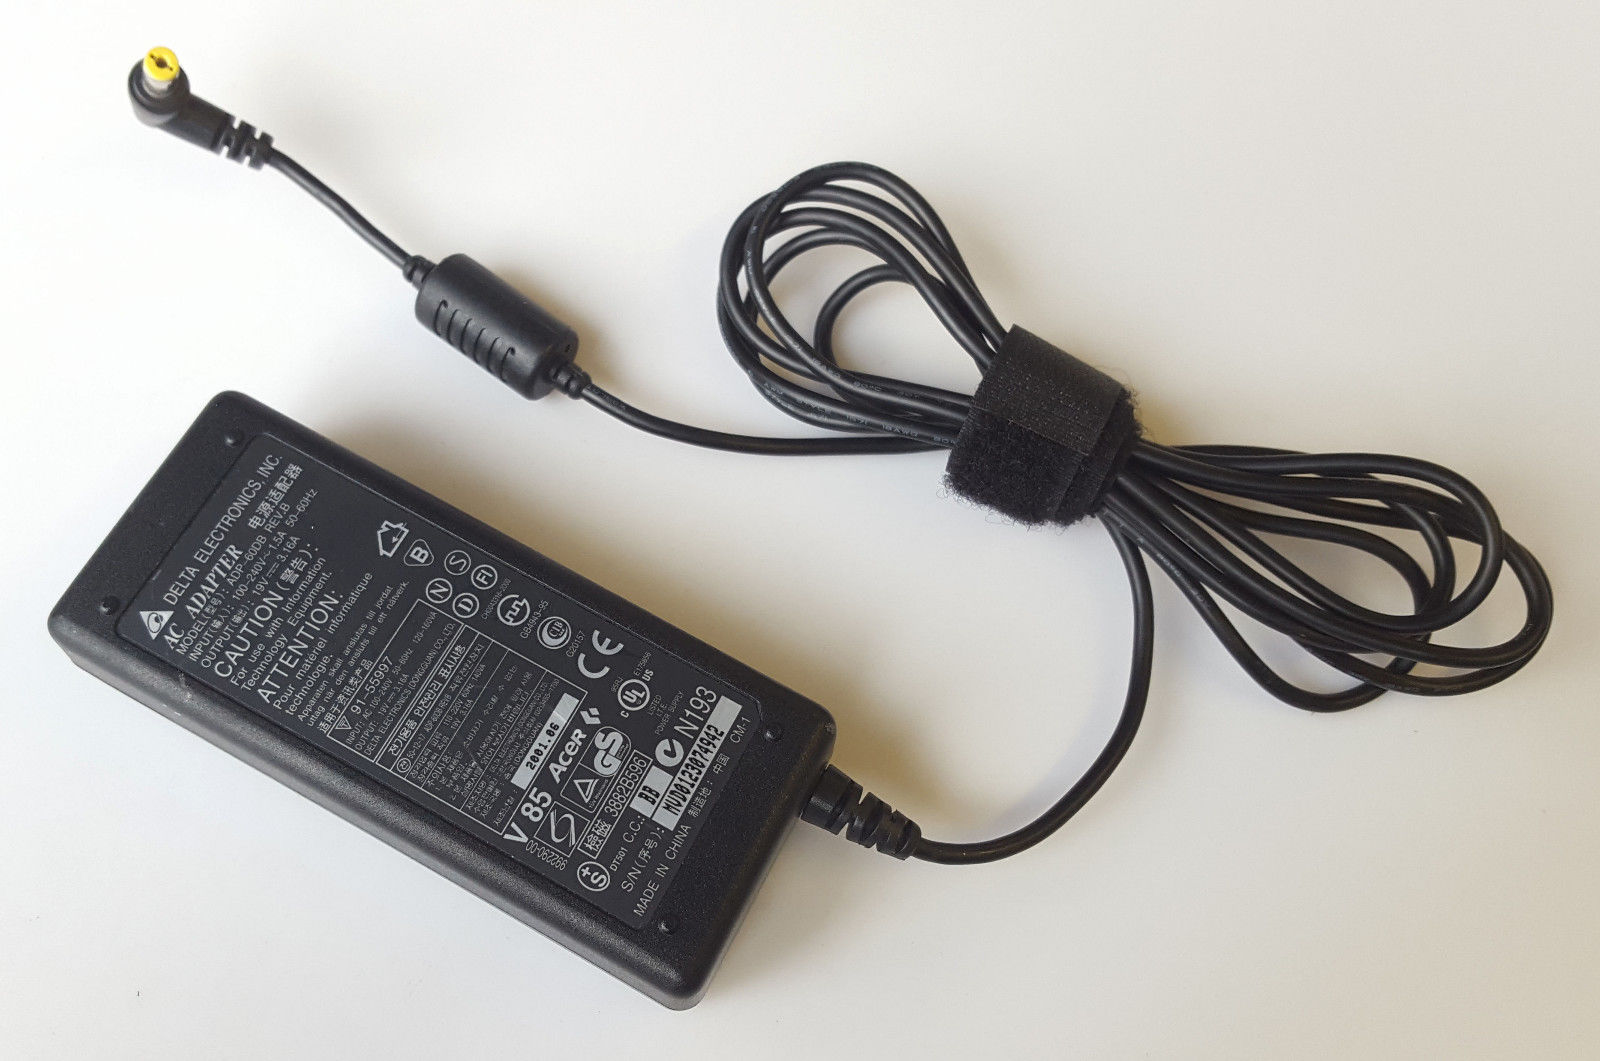 *100% Brand NEW* DELTA ELECTRONICS AD-60DB REV.B 19V 3.16A AC ADAPTER POWER SUPPLY Free shipping!